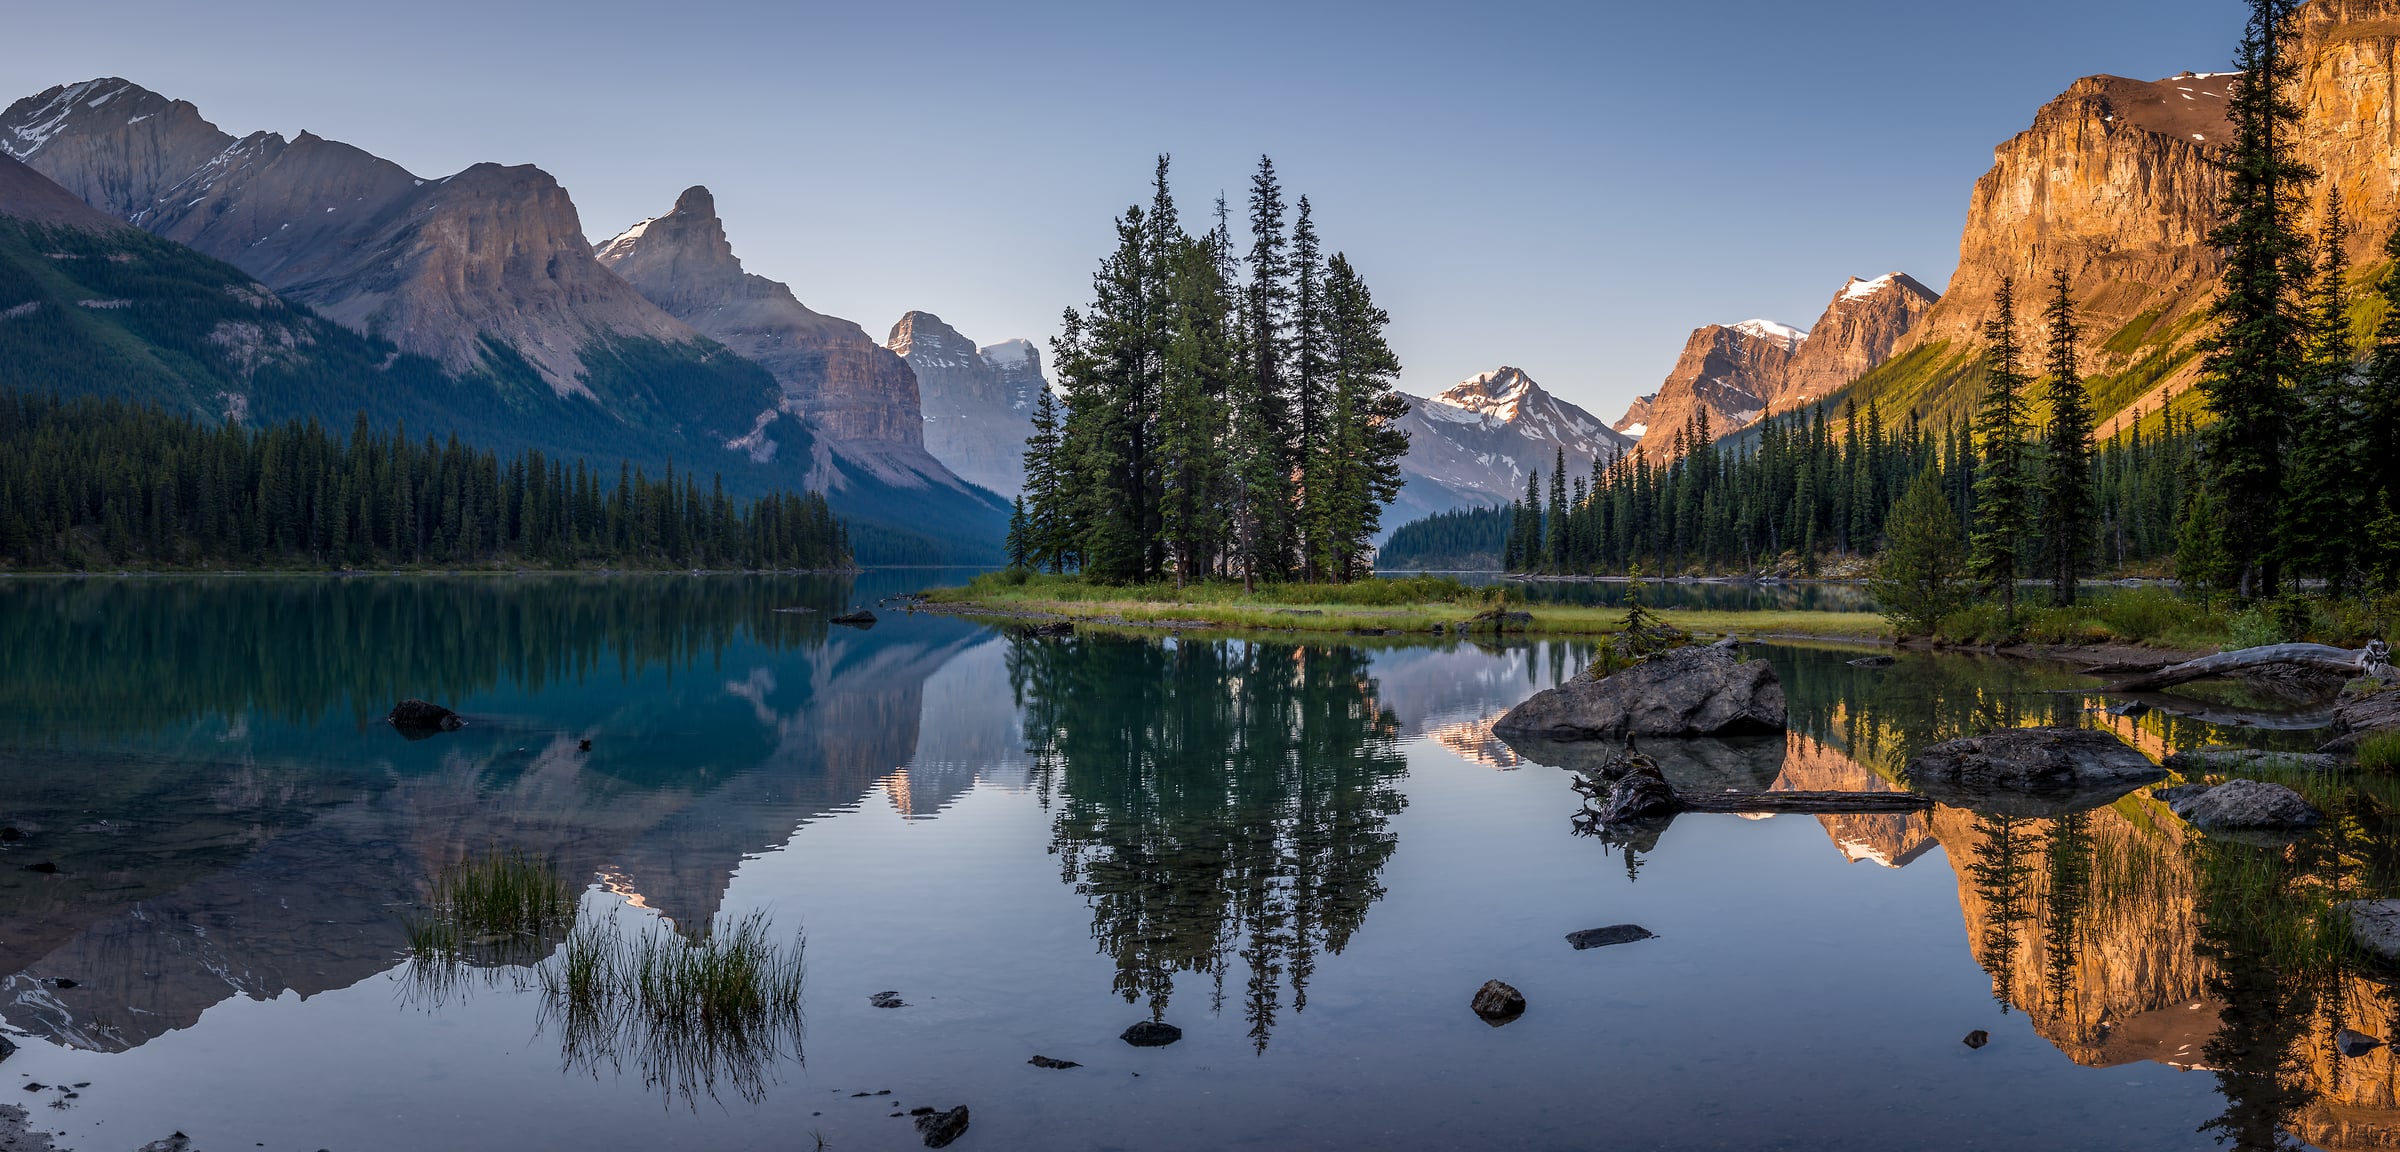 161 megapixels! A very high resolution, large-format VAST photo print of Maligne Lake, Jasper National Park, Canada; nature landscape photo created by Tim Shields